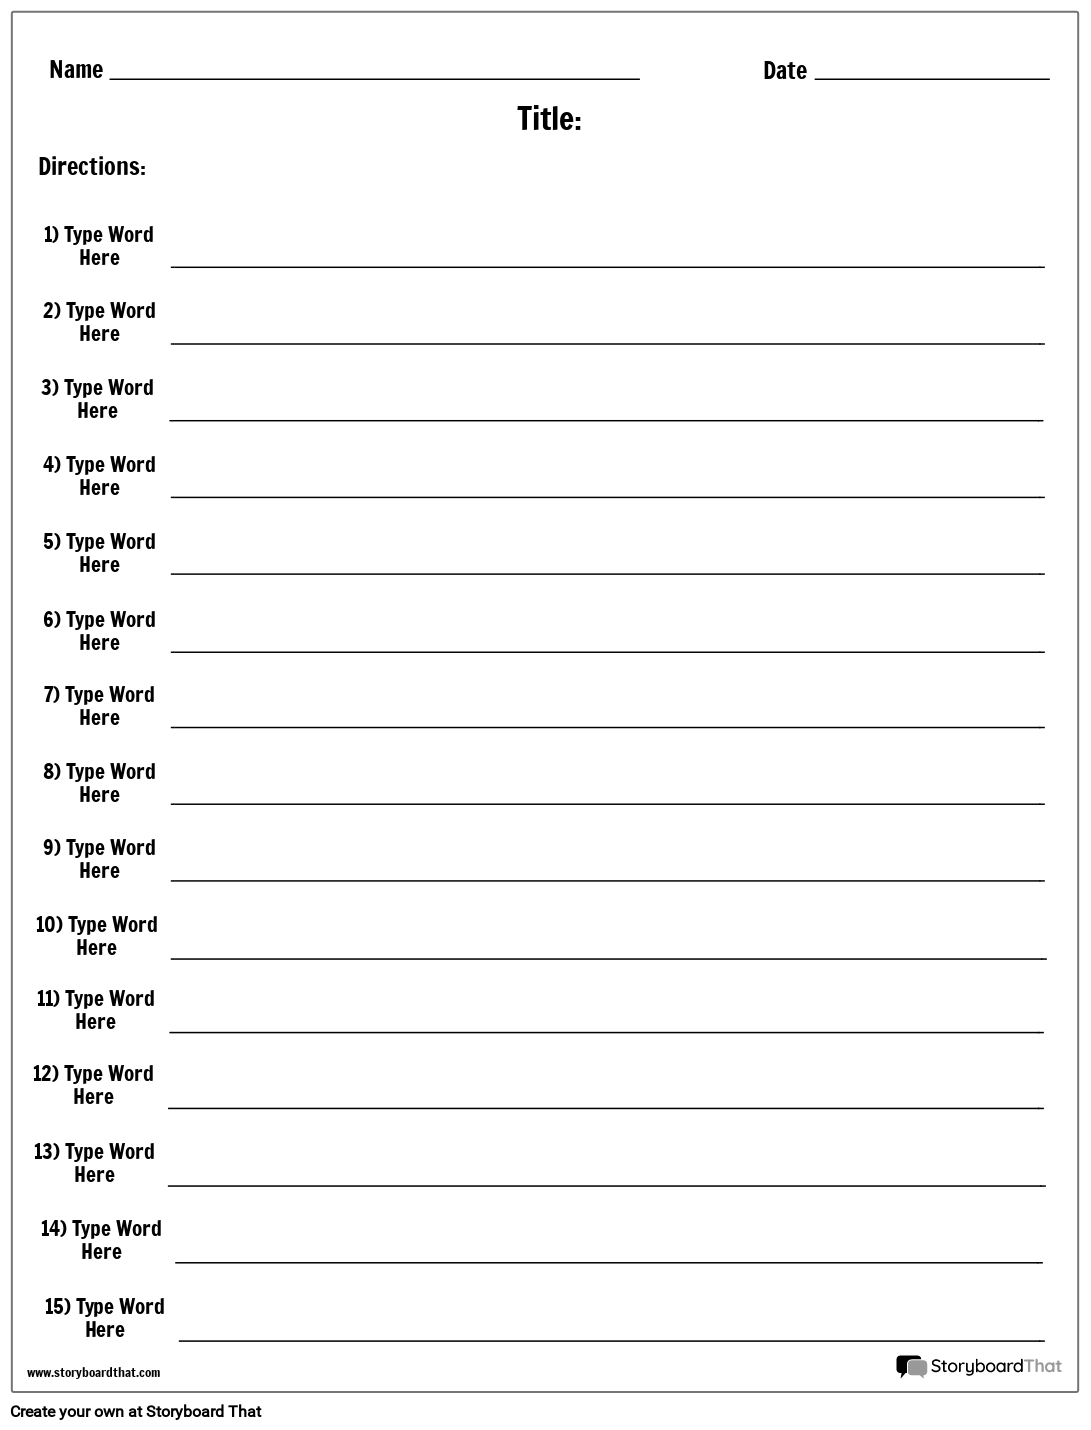 writing-your-own-definitions-worksheet-education-com-build-vocabulary-word-meaning-and